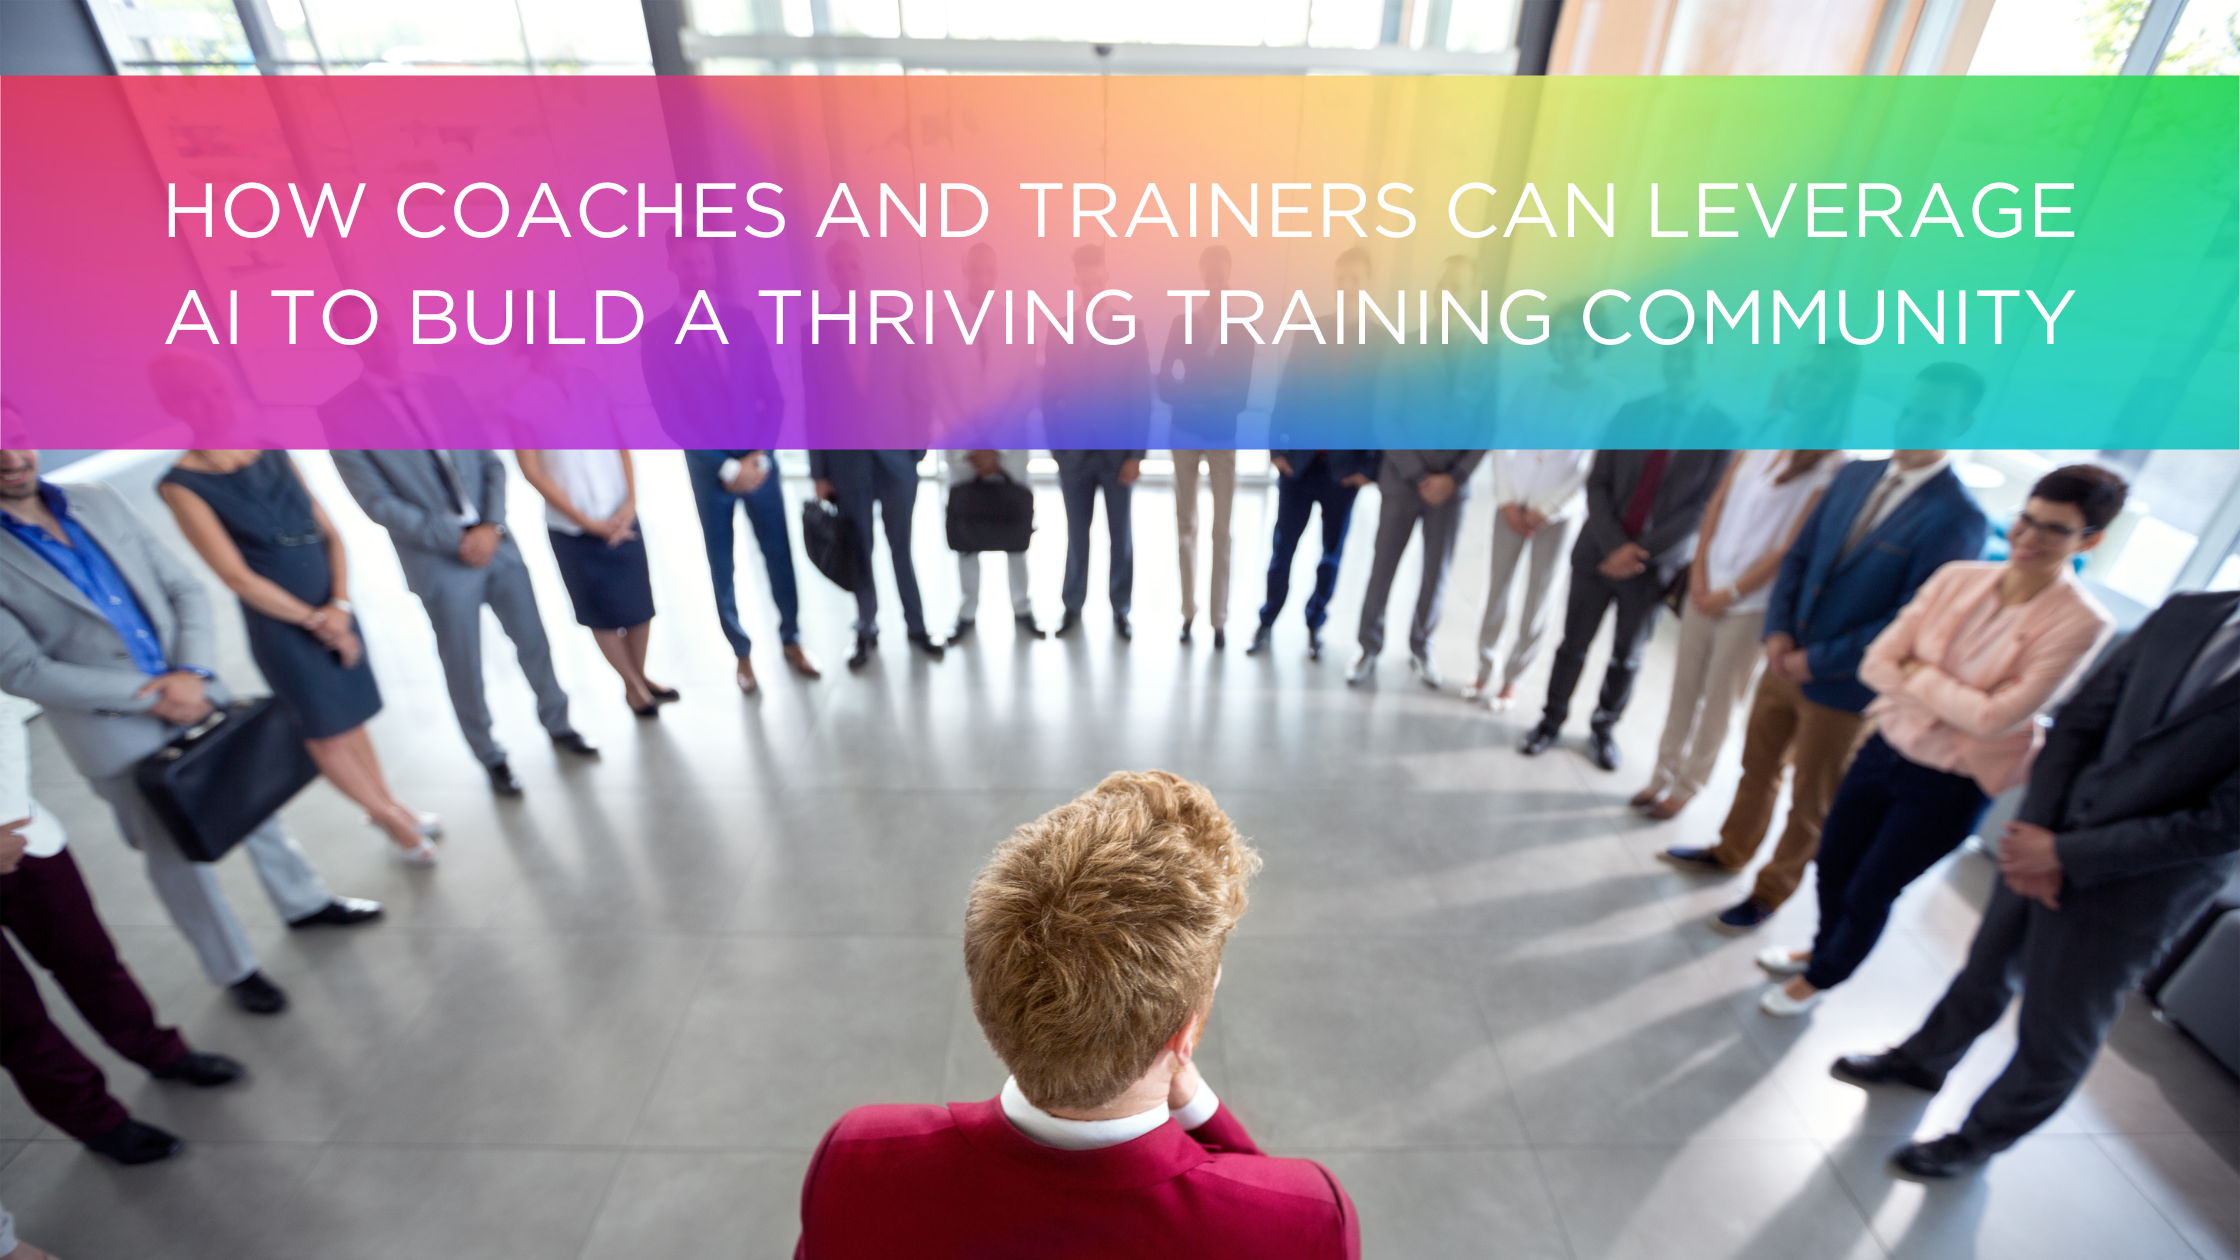 How coaches and trainers can Leverage AI to Build a Thriving Training Community